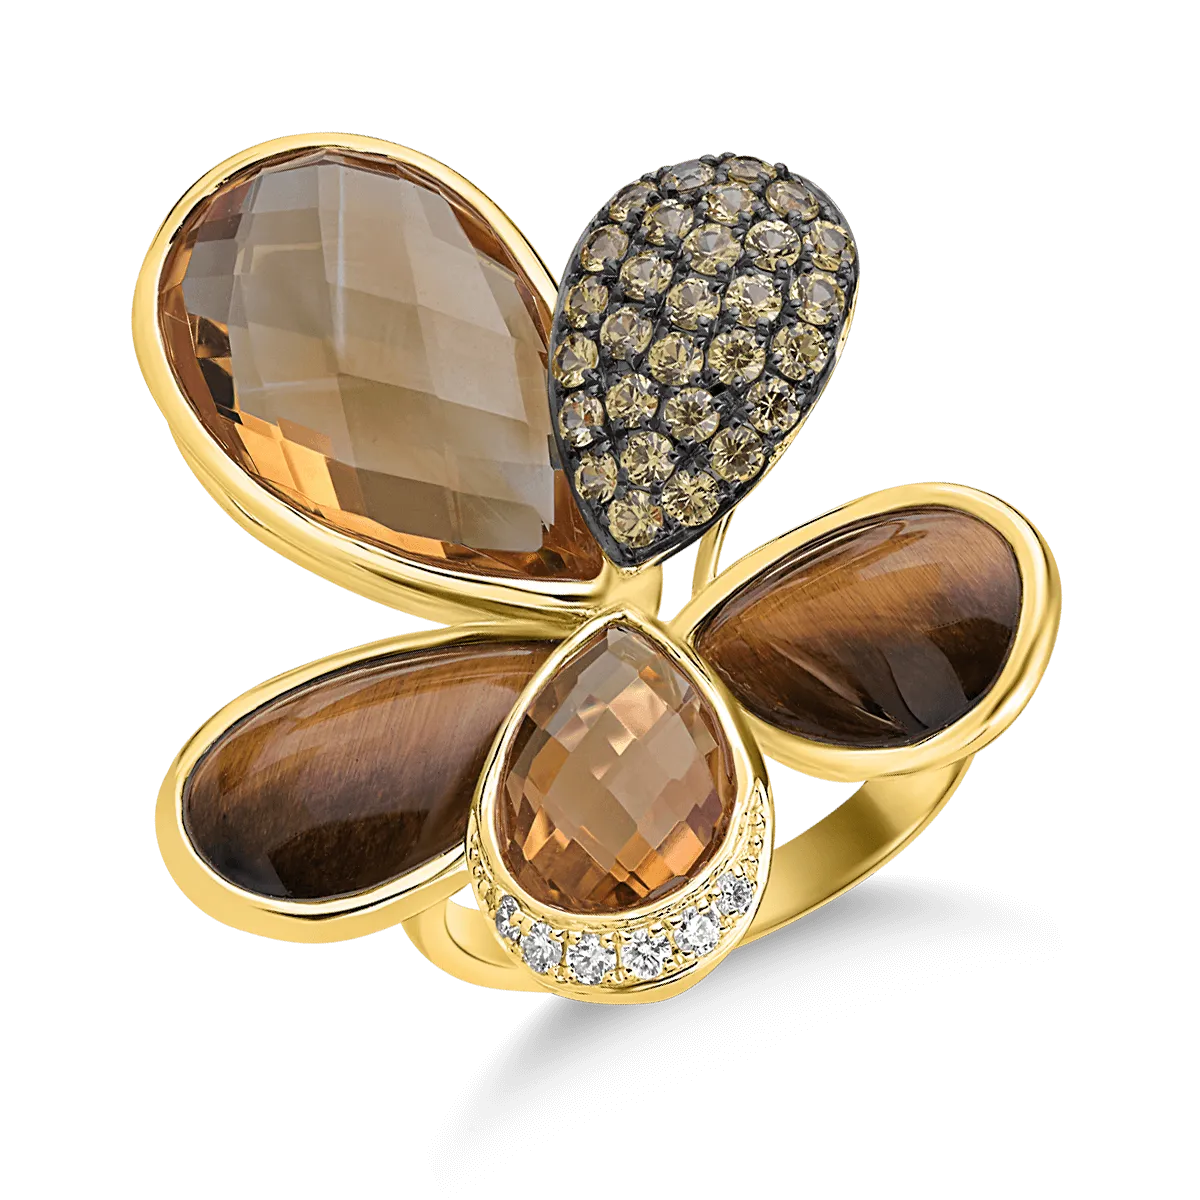 18K yellow gold ring with 21.39ct precious and semiprecious stones